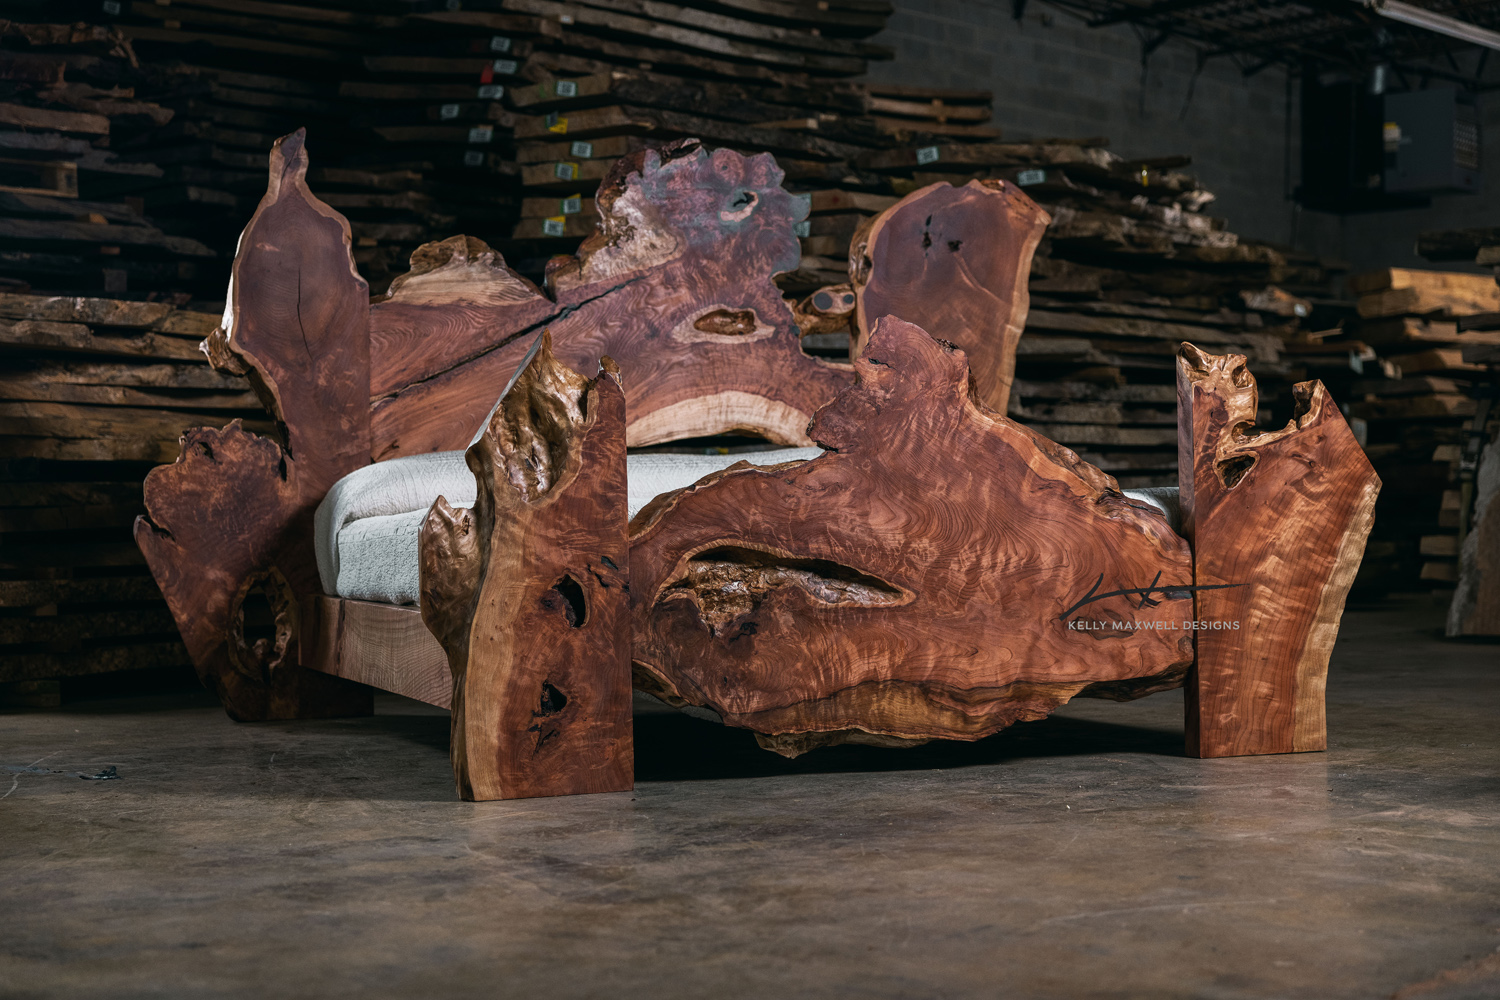 Nashville furniture designer Kelly Maxwell brings his live-edge rustic creations, such as this head-turning bed, to the Western Design Conference in Jackson Hole this September.